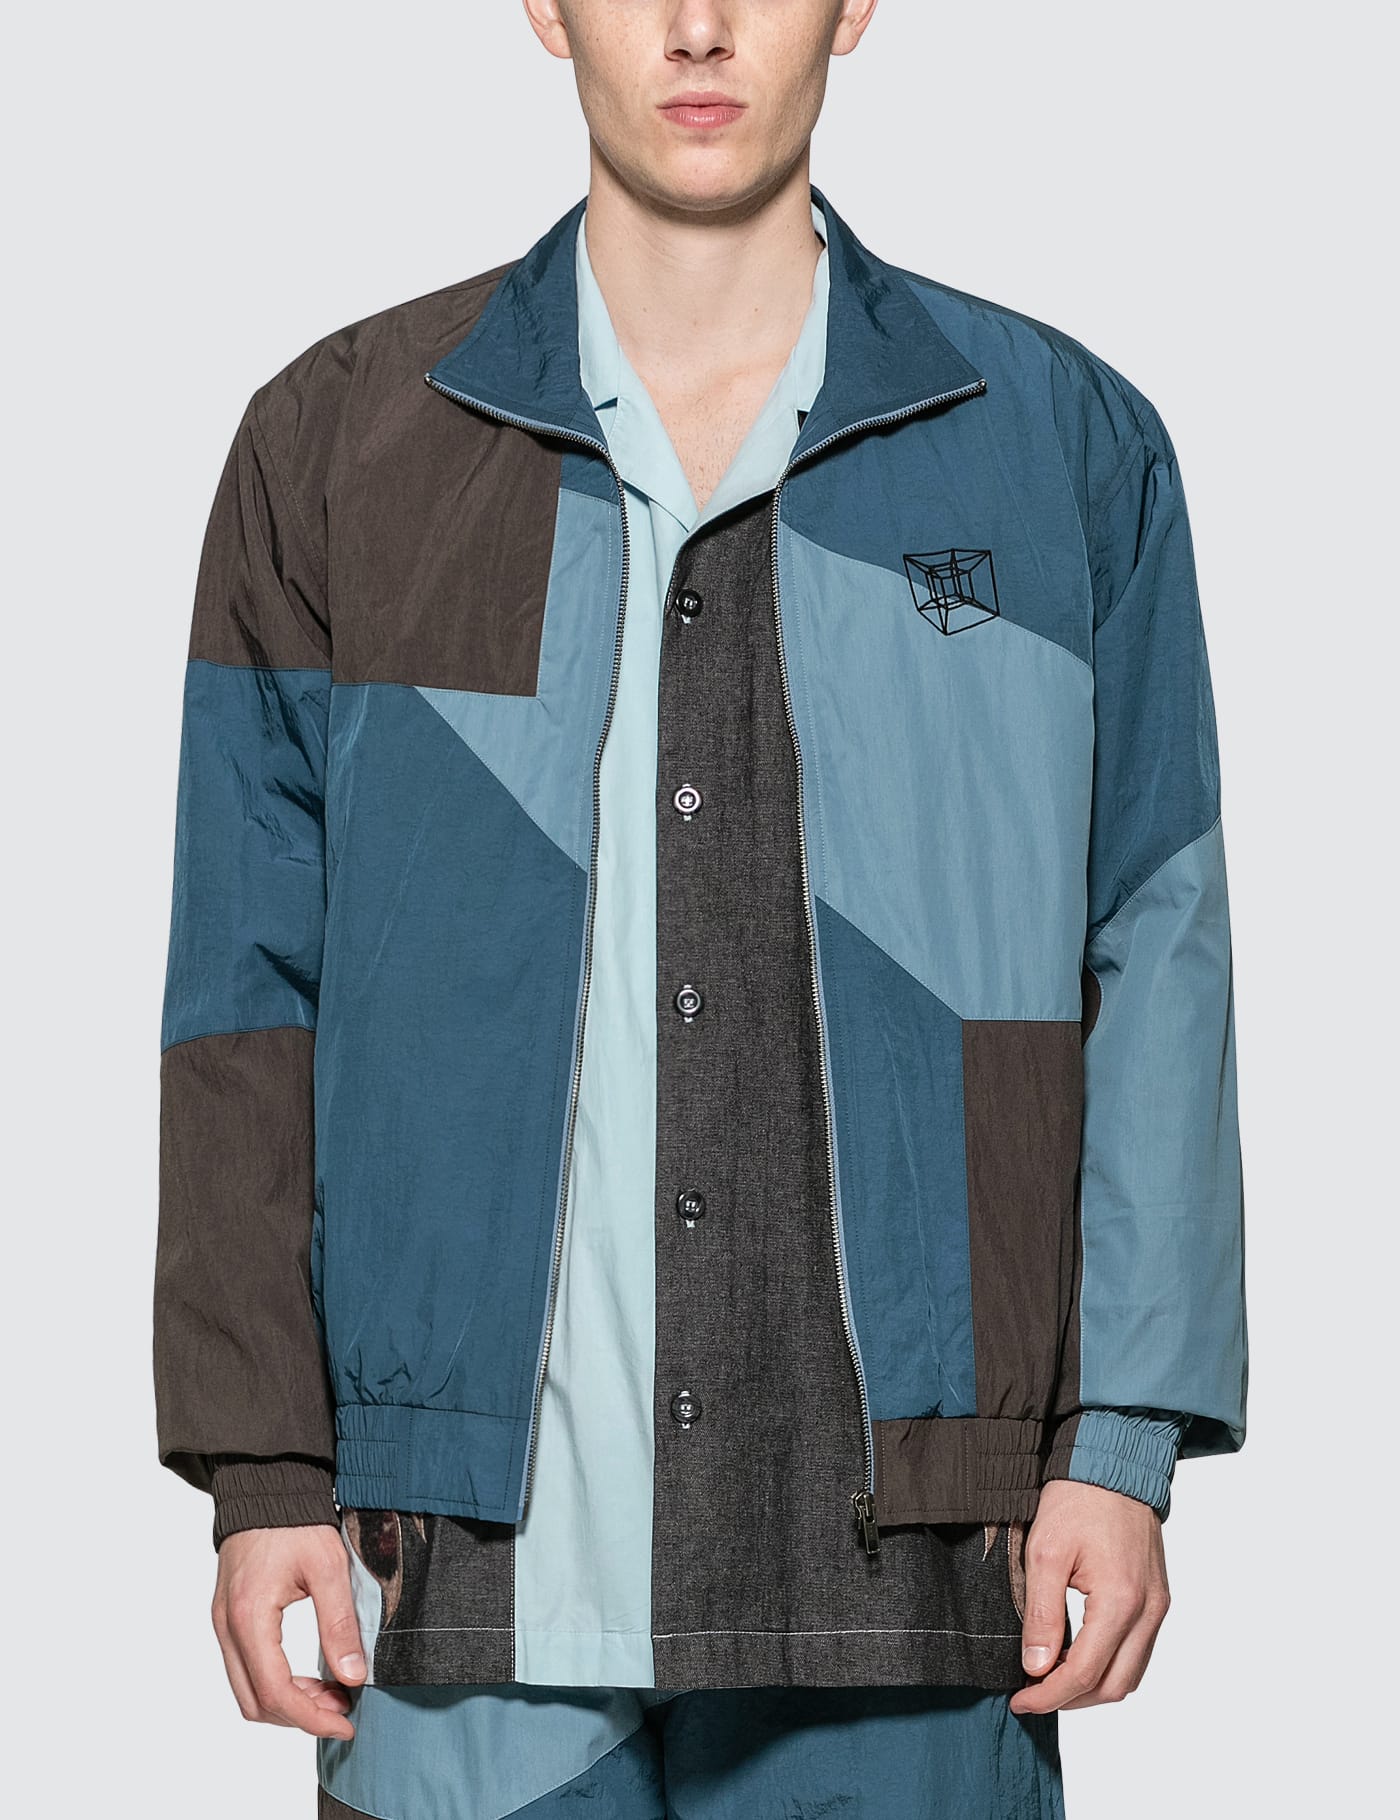 South2 West8 - Pen Jacket | HBX - Globally Curated Fashion and 